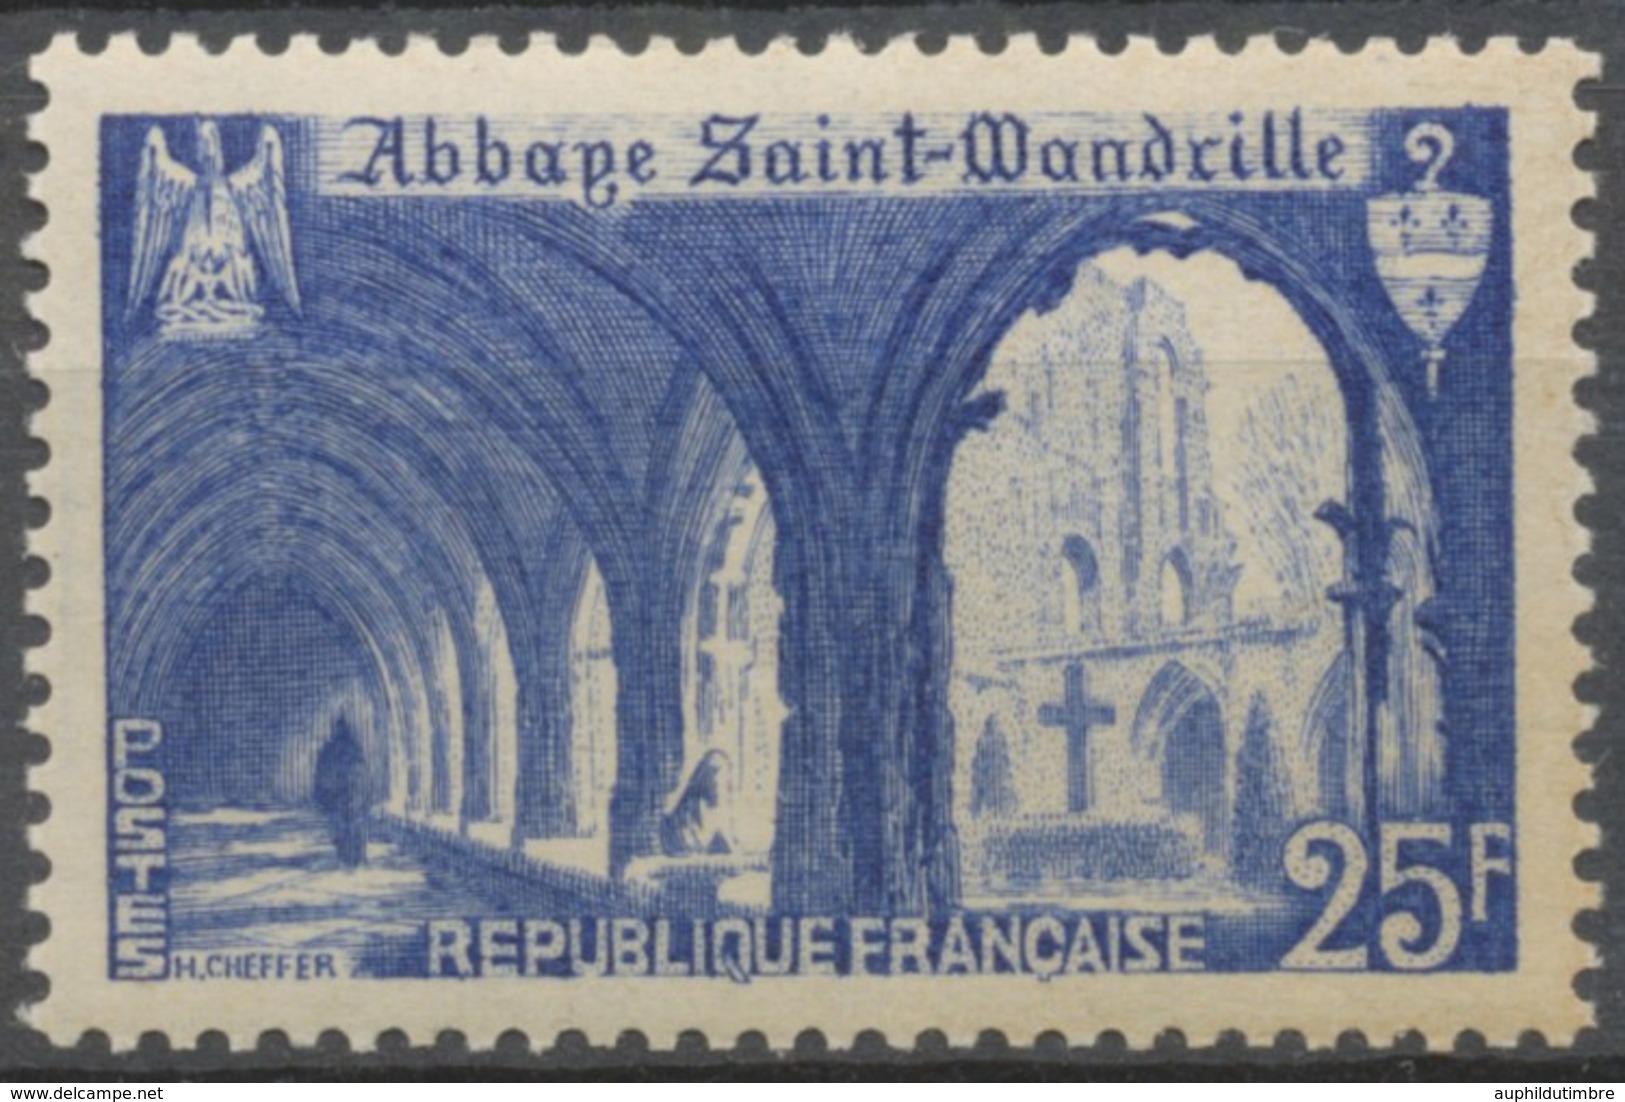 Monuments Et Sites. Abbaye De Saint-Wandrille. 25f. Outremer Neuf Luxe ** Y842 - Nuevos